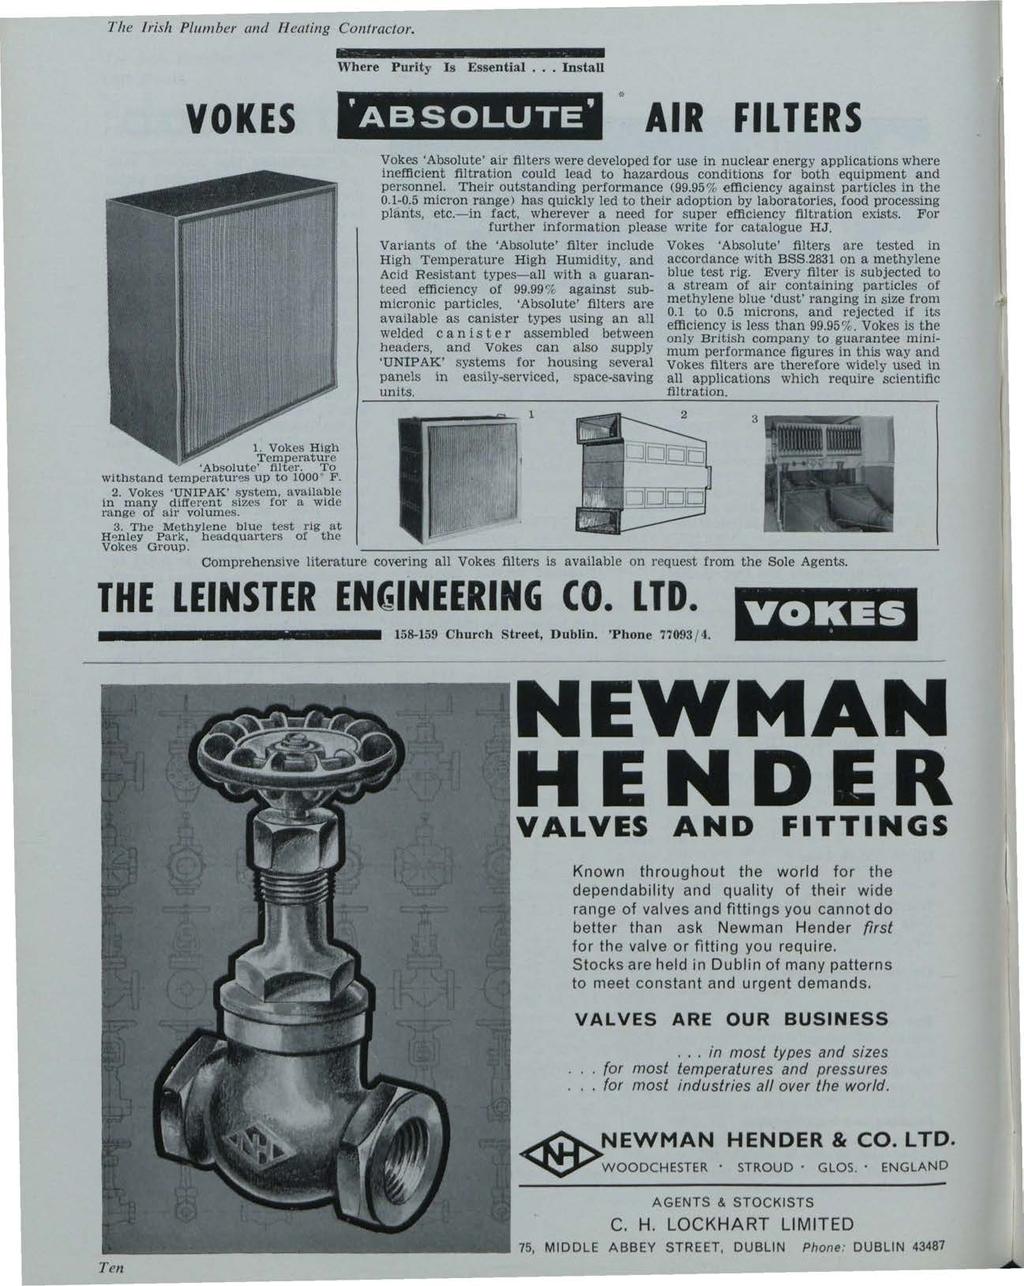 The Irish Plumber and Heating Contractor. Building Services News, Vol. 2, Iss. 12 [1963], Art. 1 Where Purity Is Essential.. Install -:: VOKES 'ABSOLUTE' AIR FILTERS 1.